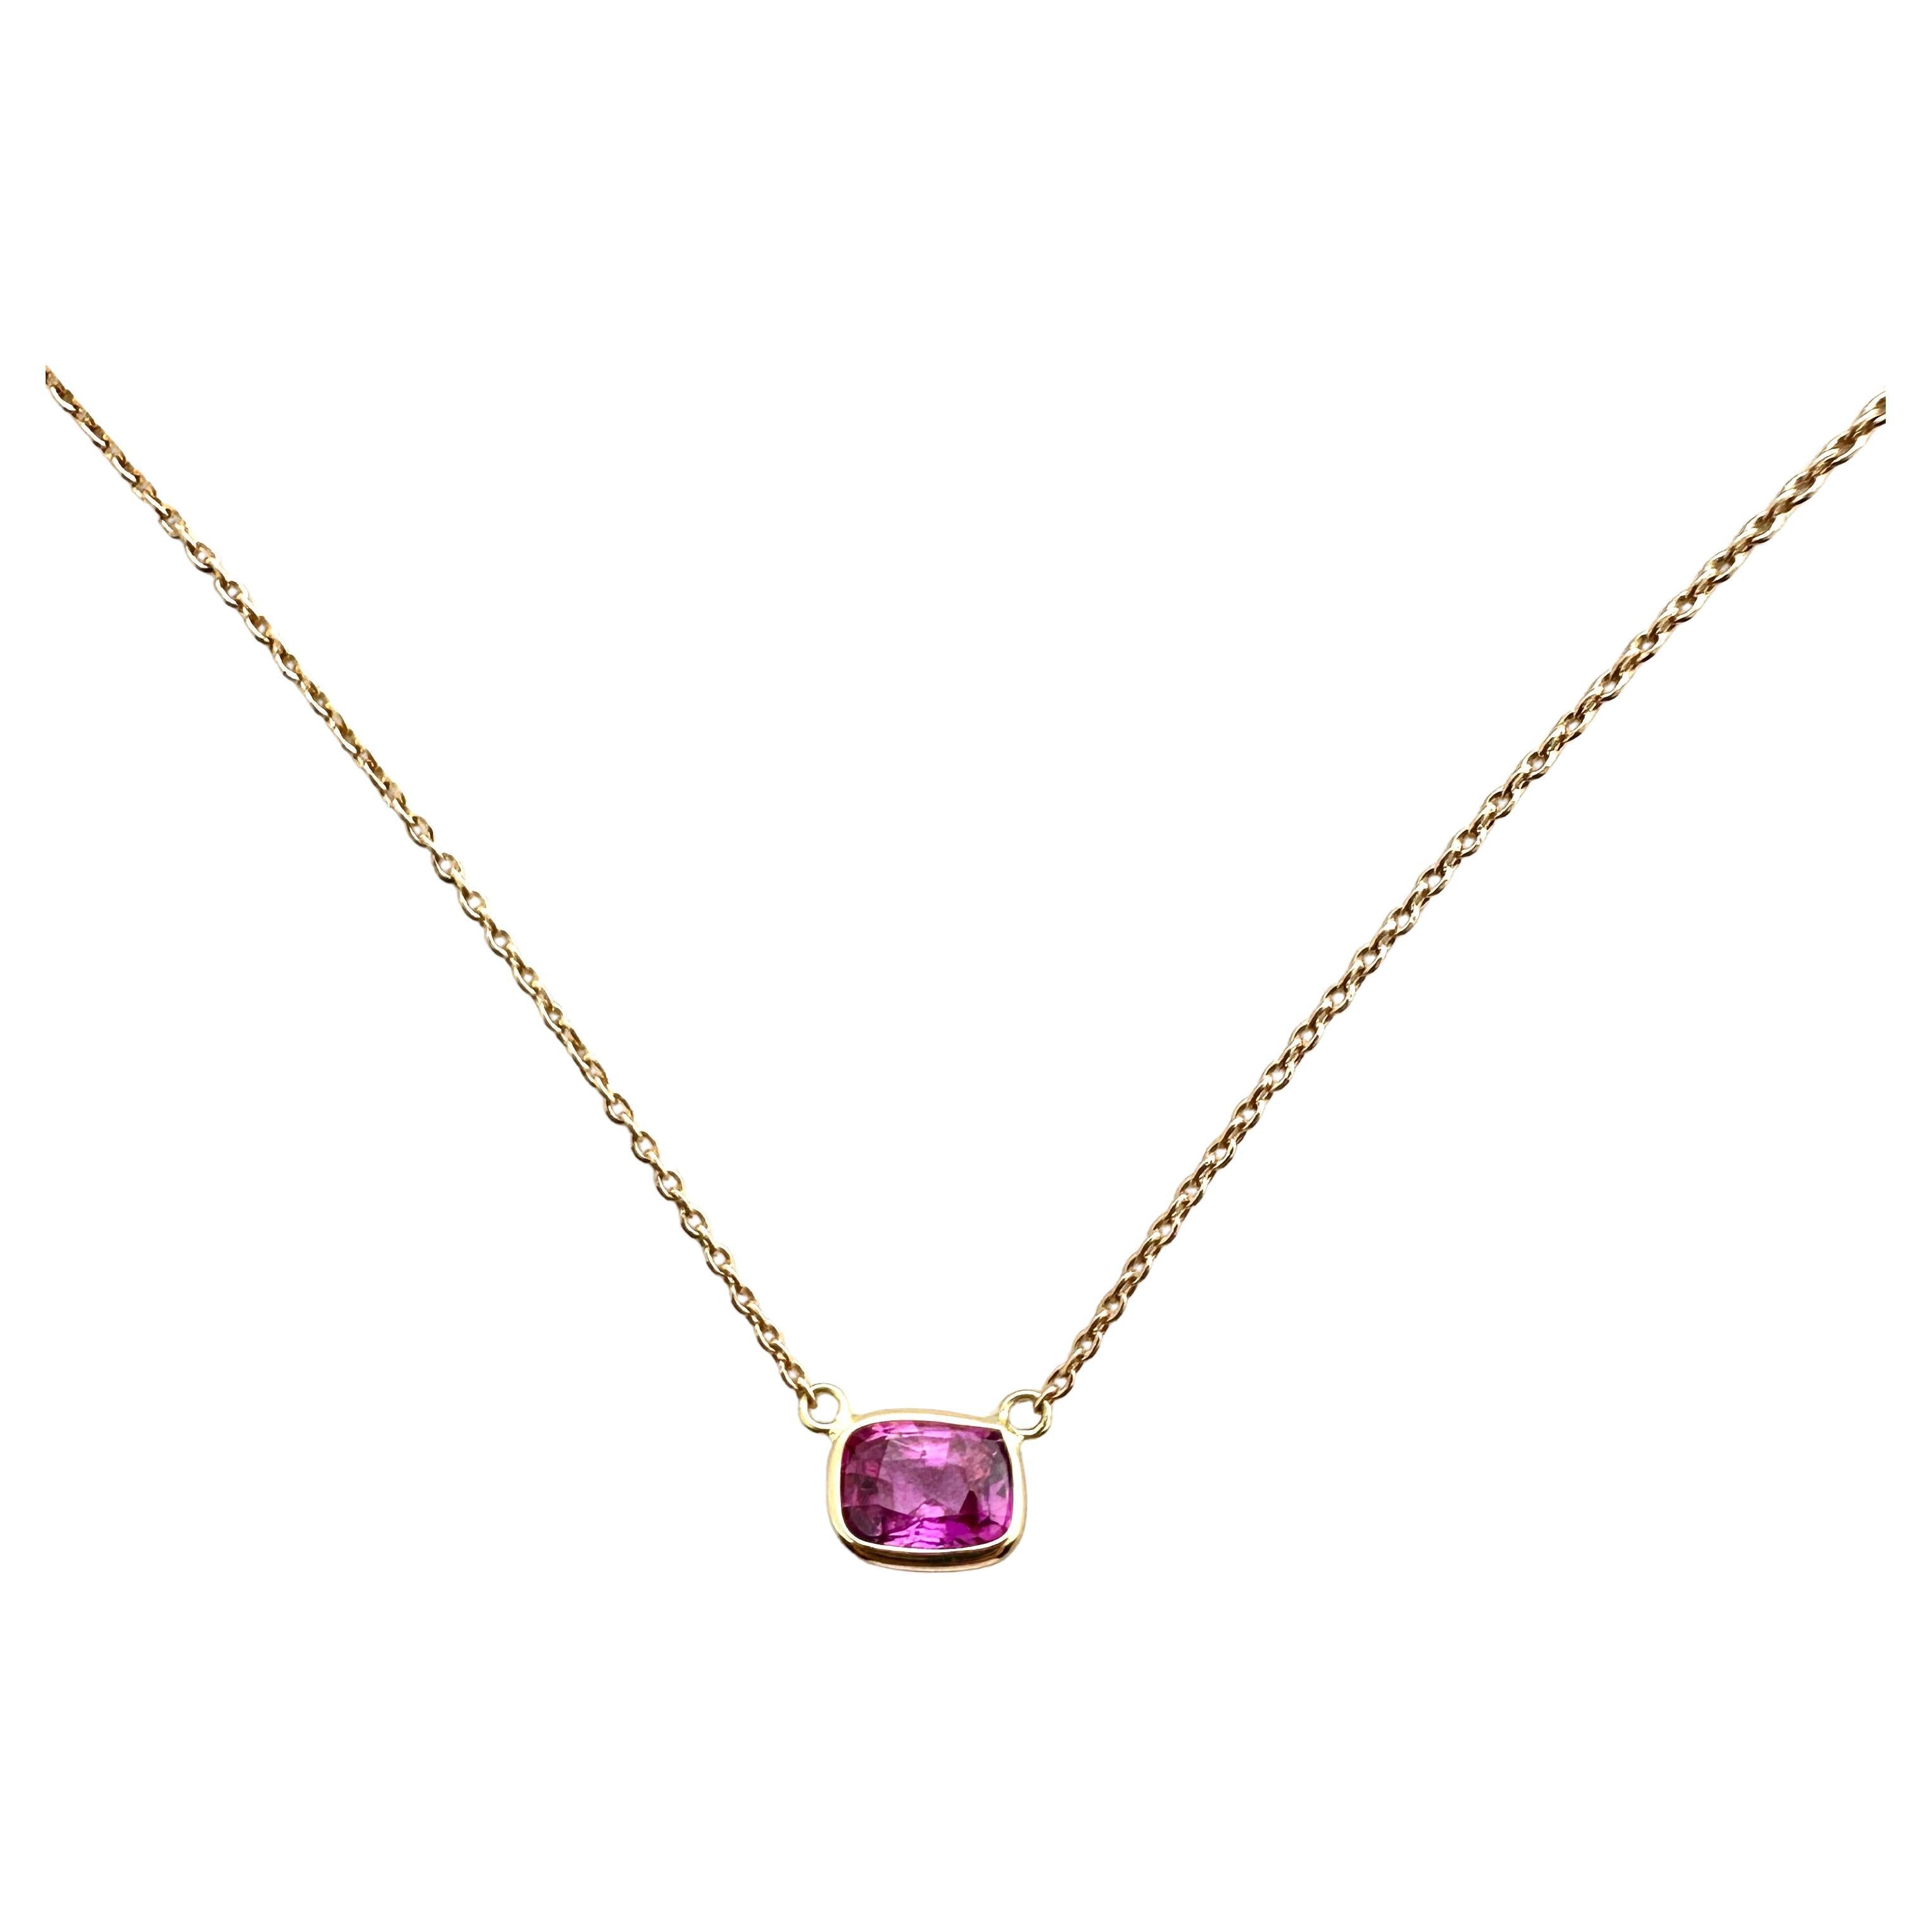 1.03ct Certified Pink Sapphire Cushion Cut Solitaire Necklace in 14k RG